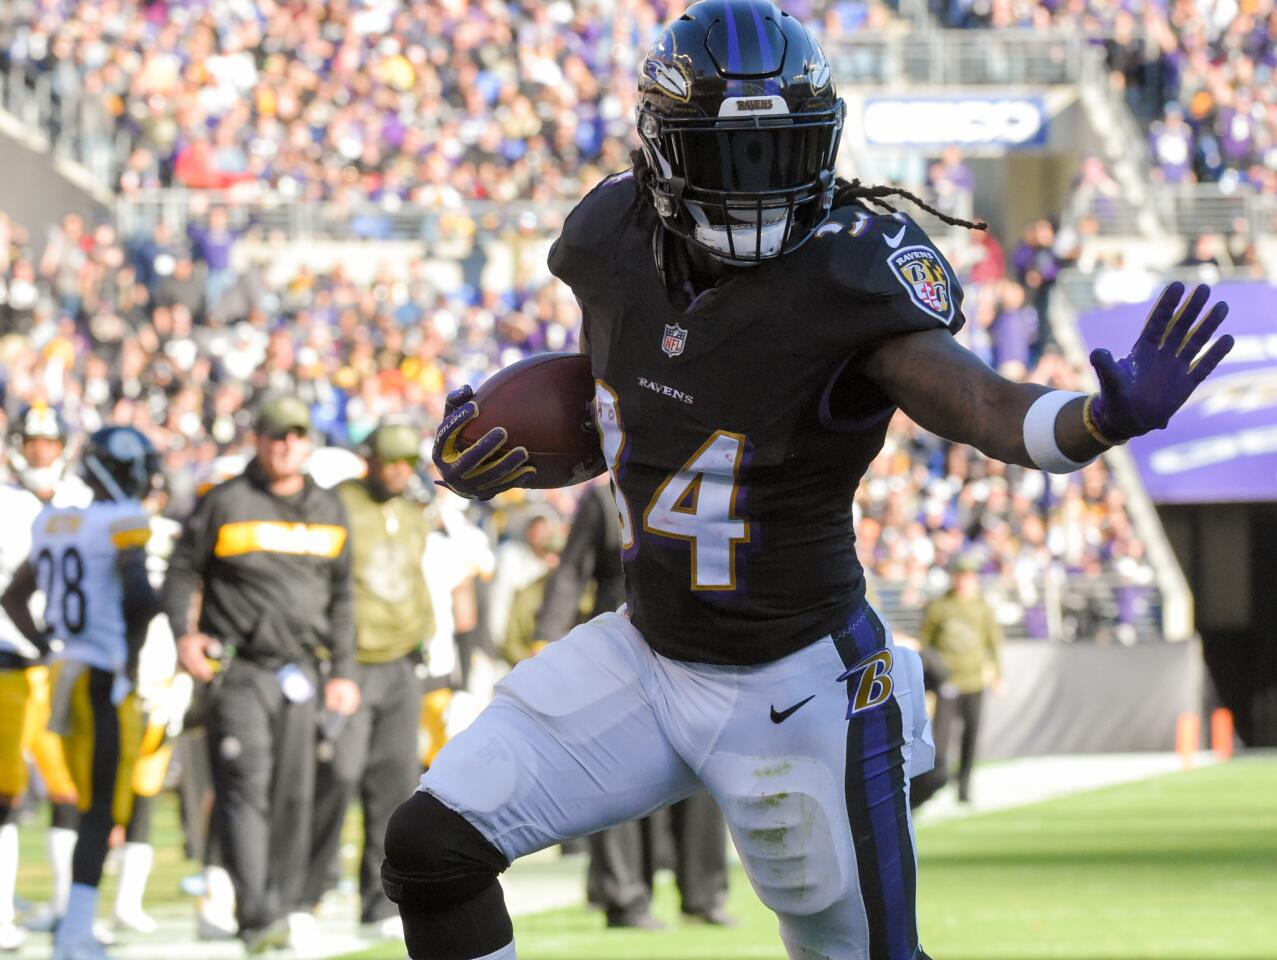 Ravens running back Alex Collins was arrested March 1 after a crash in Owings Mills, police and the team said. He has been charged with possession of more than 10 grams of marijuana, intent to distribute marijuana and possession of a handgun in a vehicle.